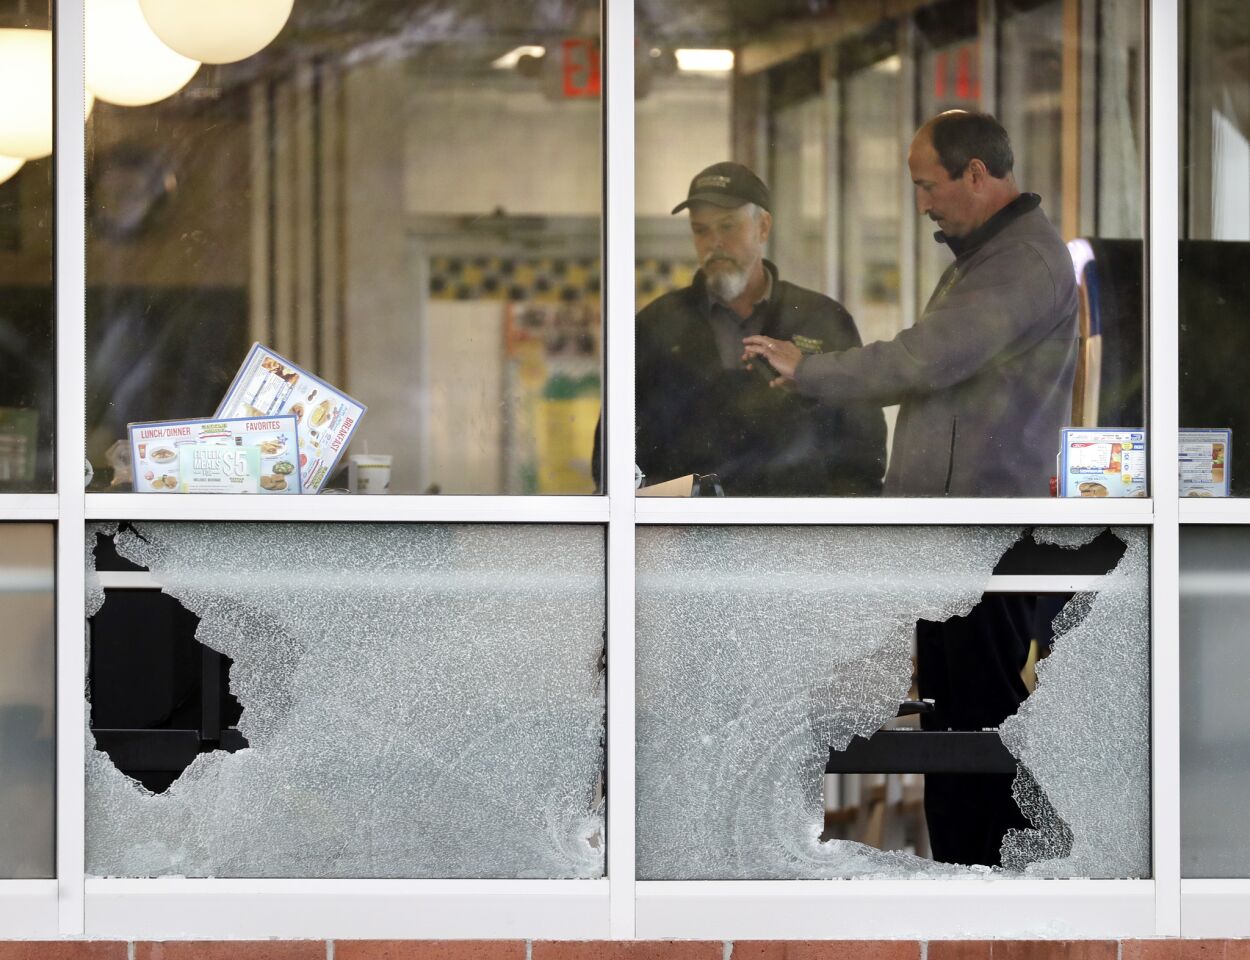 Investigator at a Nashville Waffle House where several people died after a gunman opened fire on Sunday.